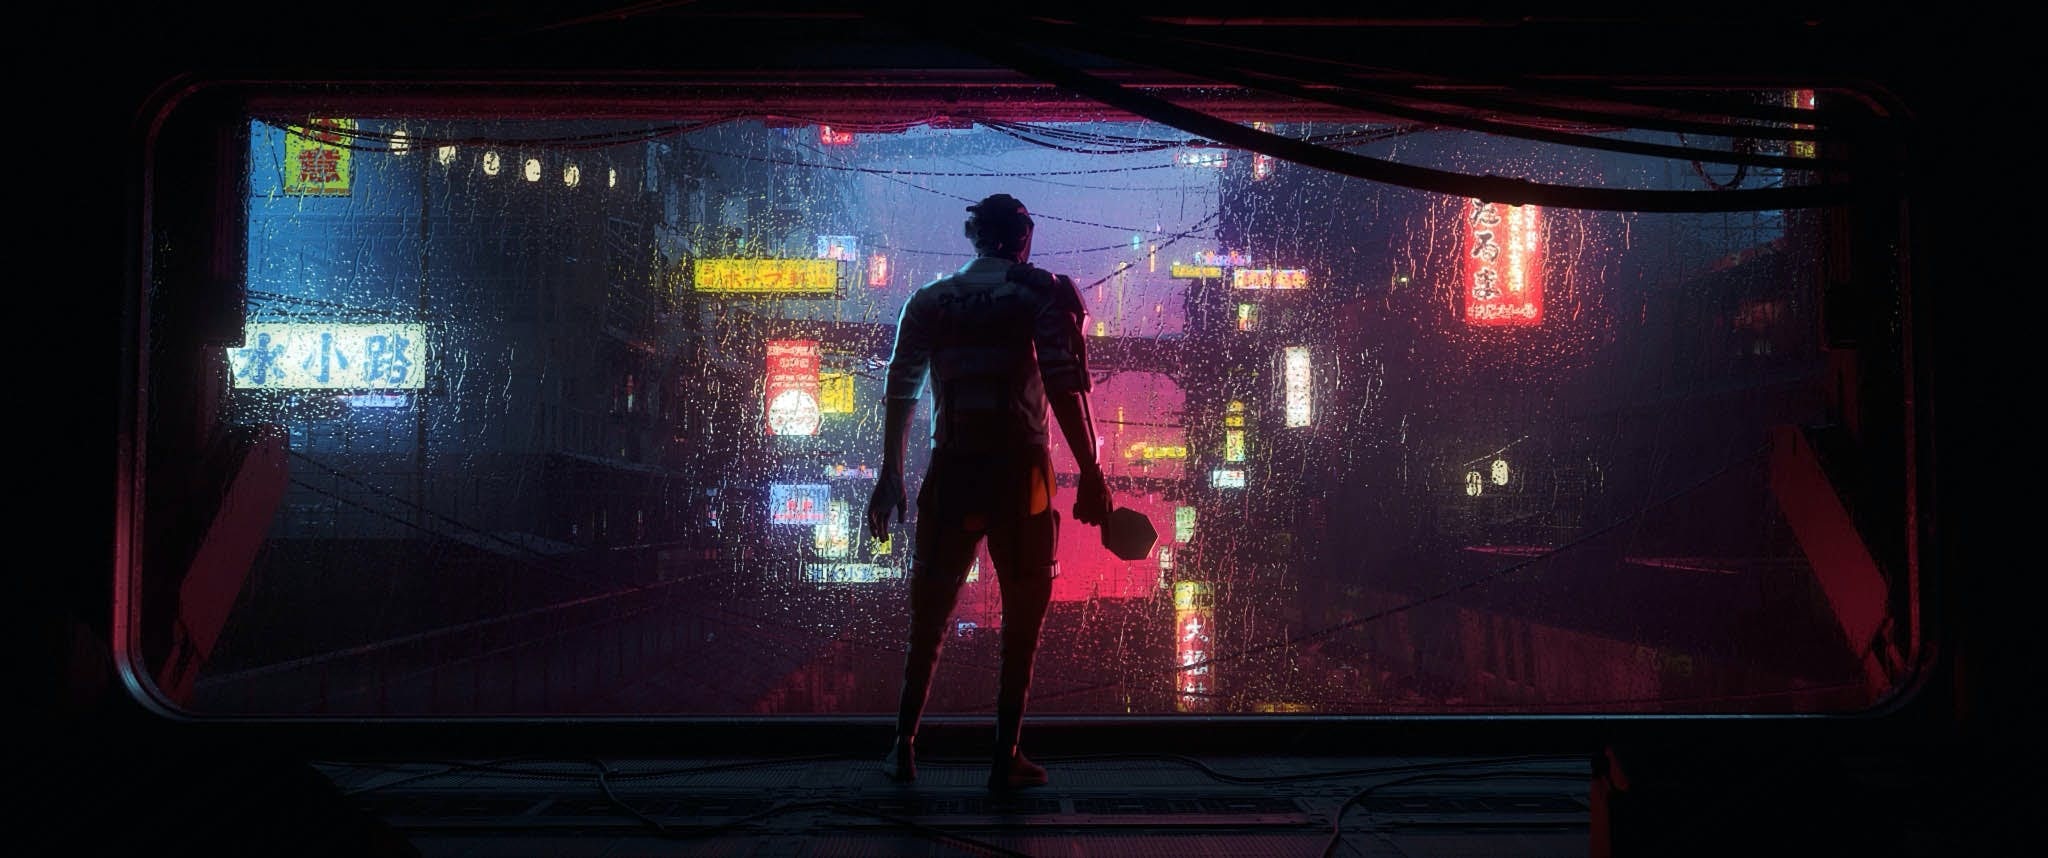 stiga cybershape character looking out over cyberpunk environment